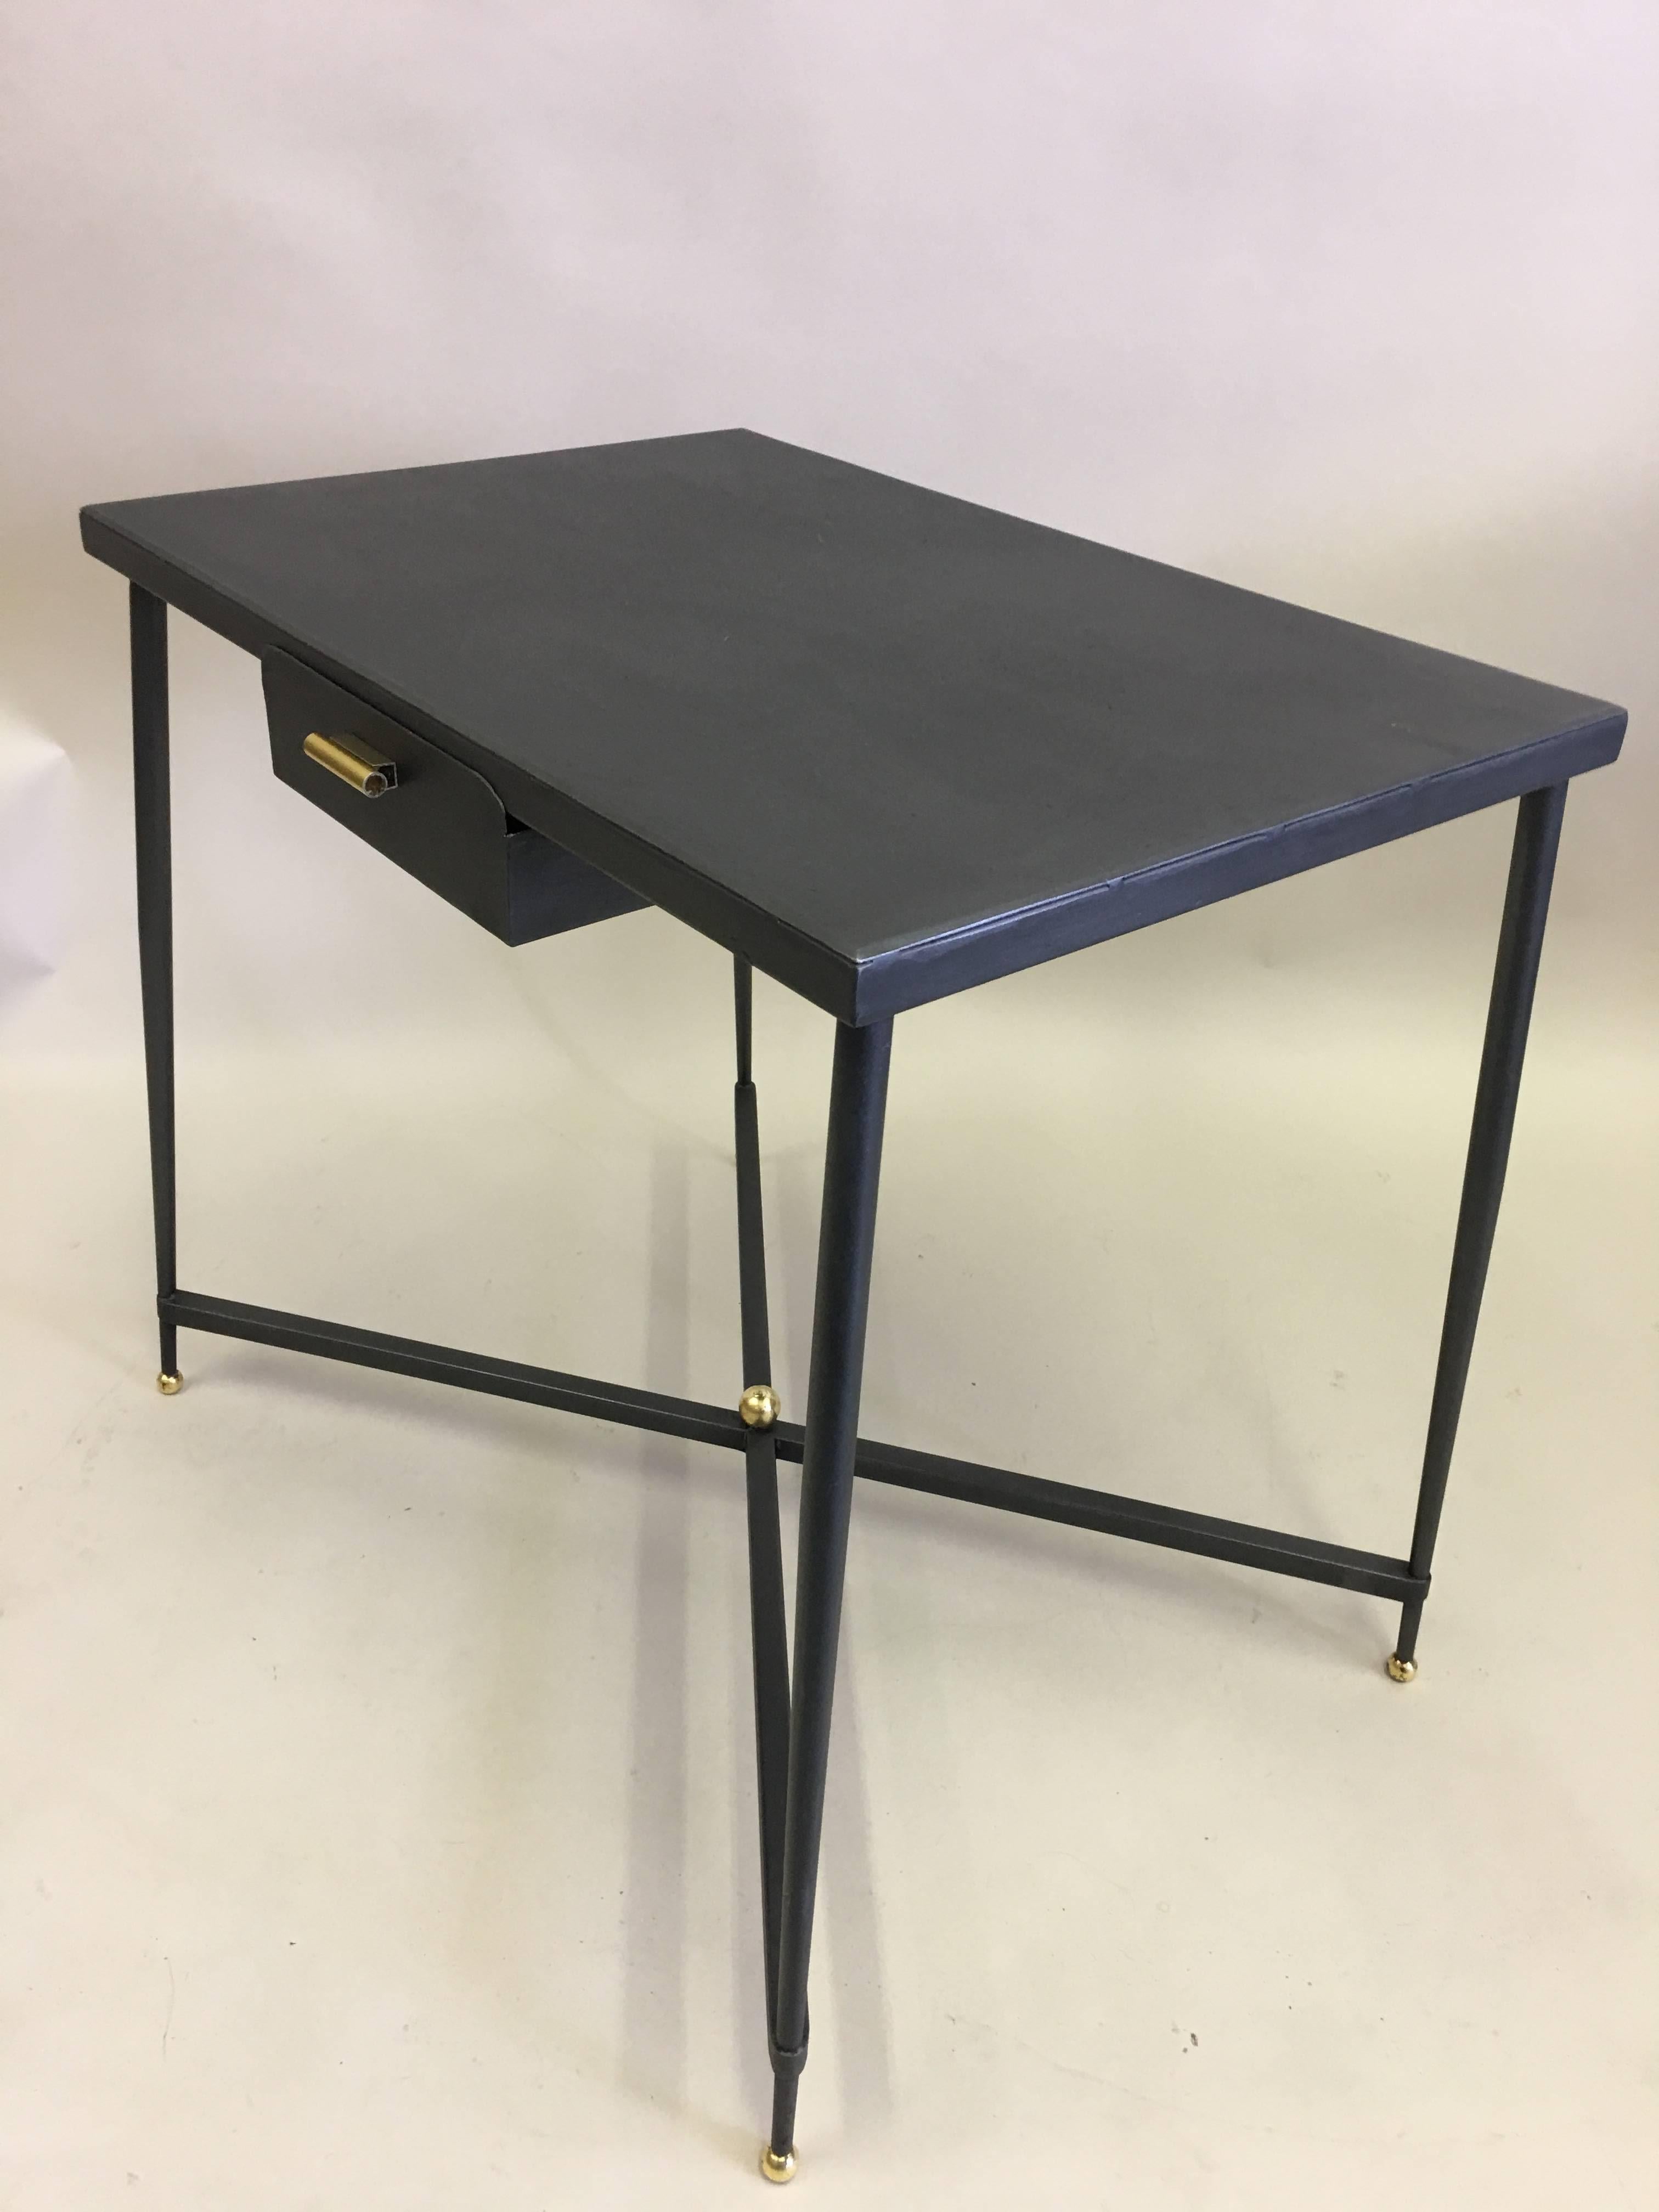 French Mid-Century Modern Neoclassical Desk /Writing Table by Jacques Adnet 1940 In Good Condition For Sale In New York, NY